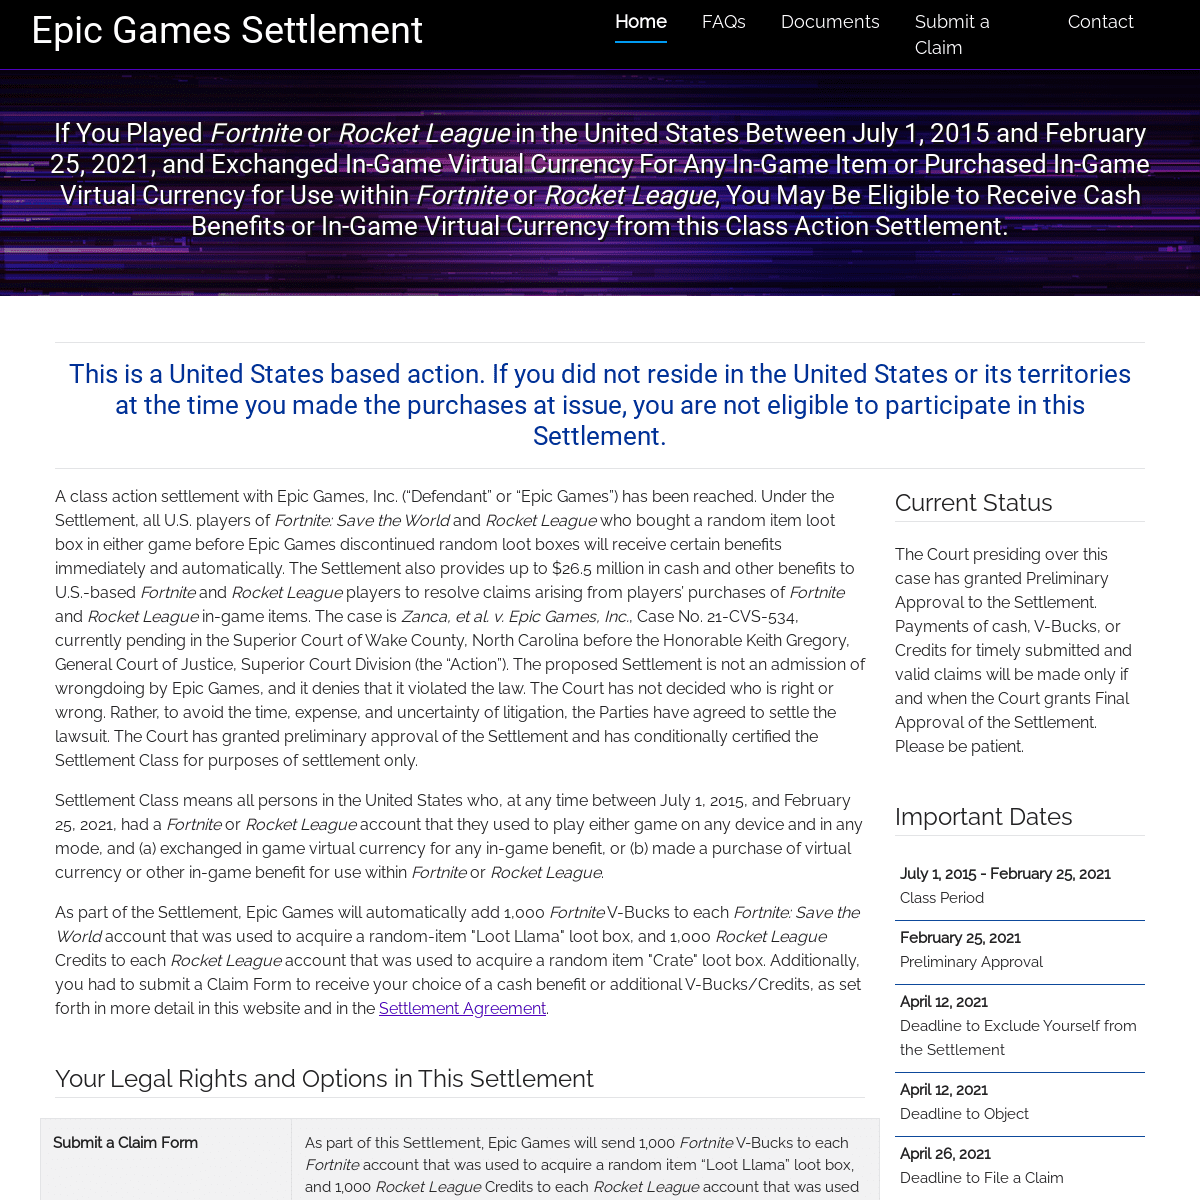 A complete backup of https://epiclootboxsettlement.com